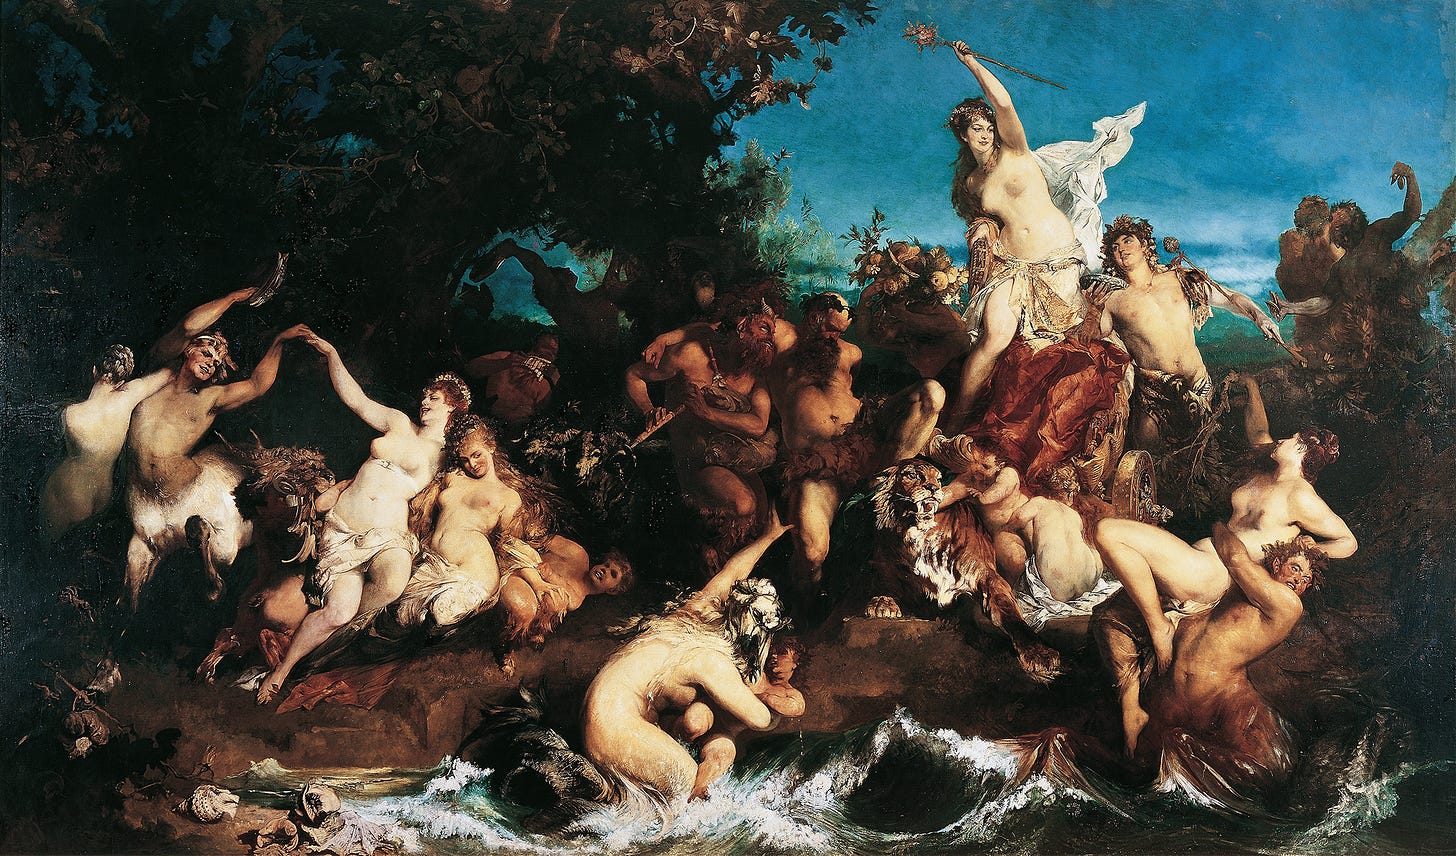 Bacchus and Ariadne (1873-1874) by Hans Makart